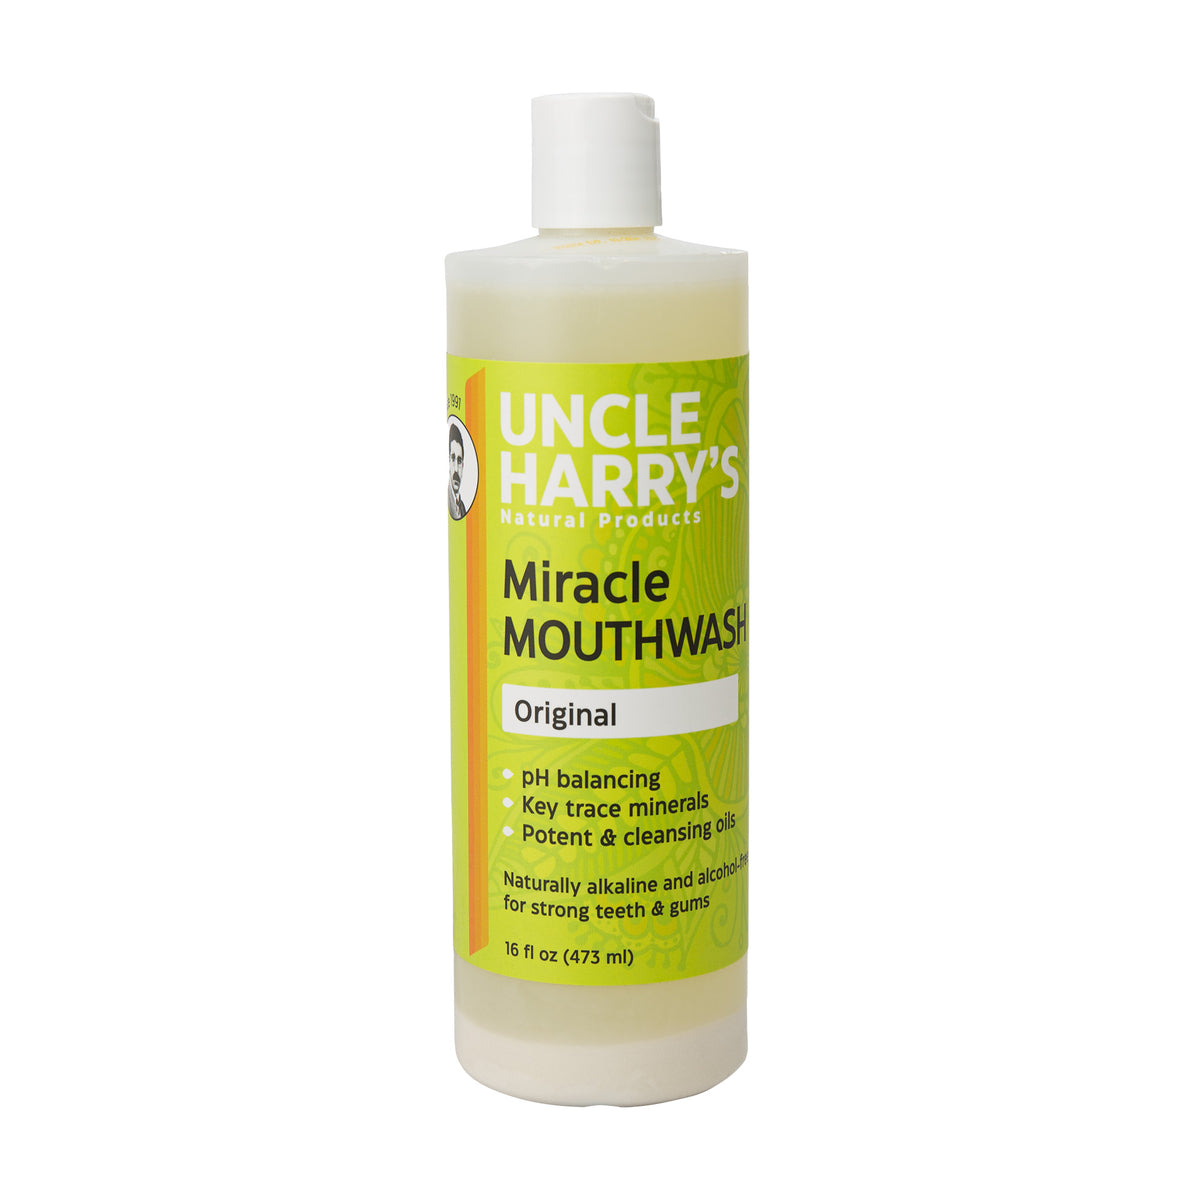 Primary image of Miracle Mouthwash